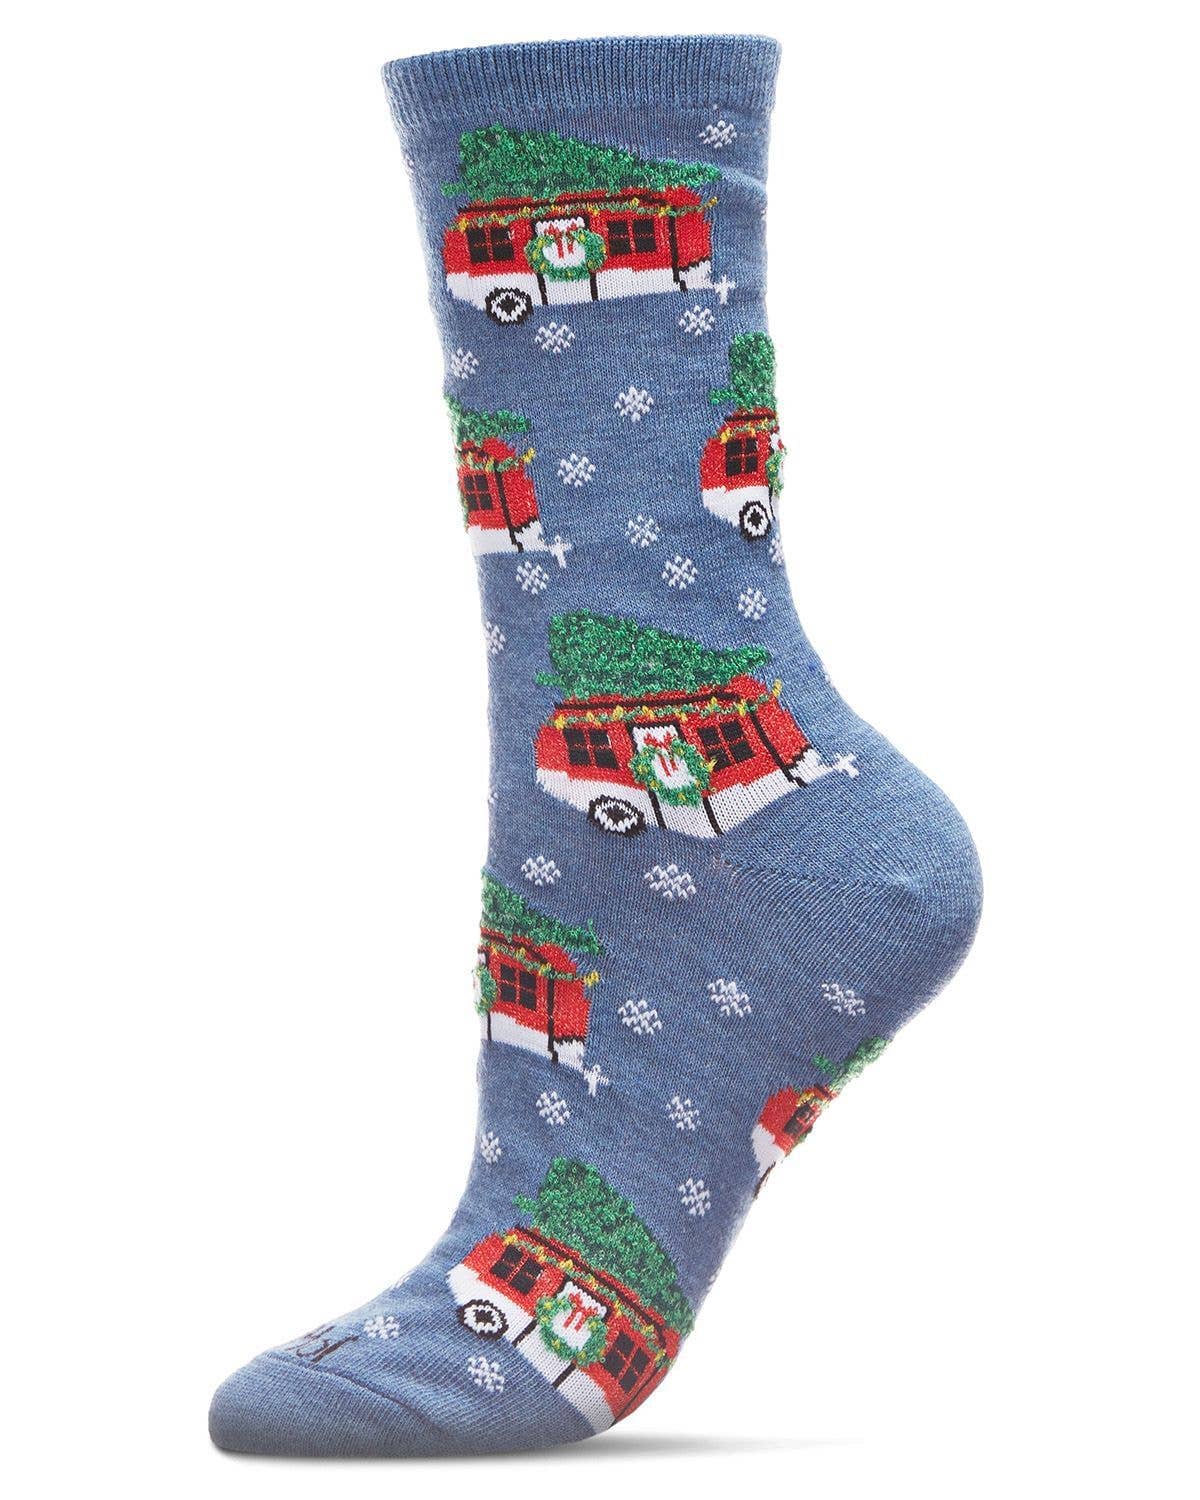 70% OFF Festive Campers Holiday Crew Socks